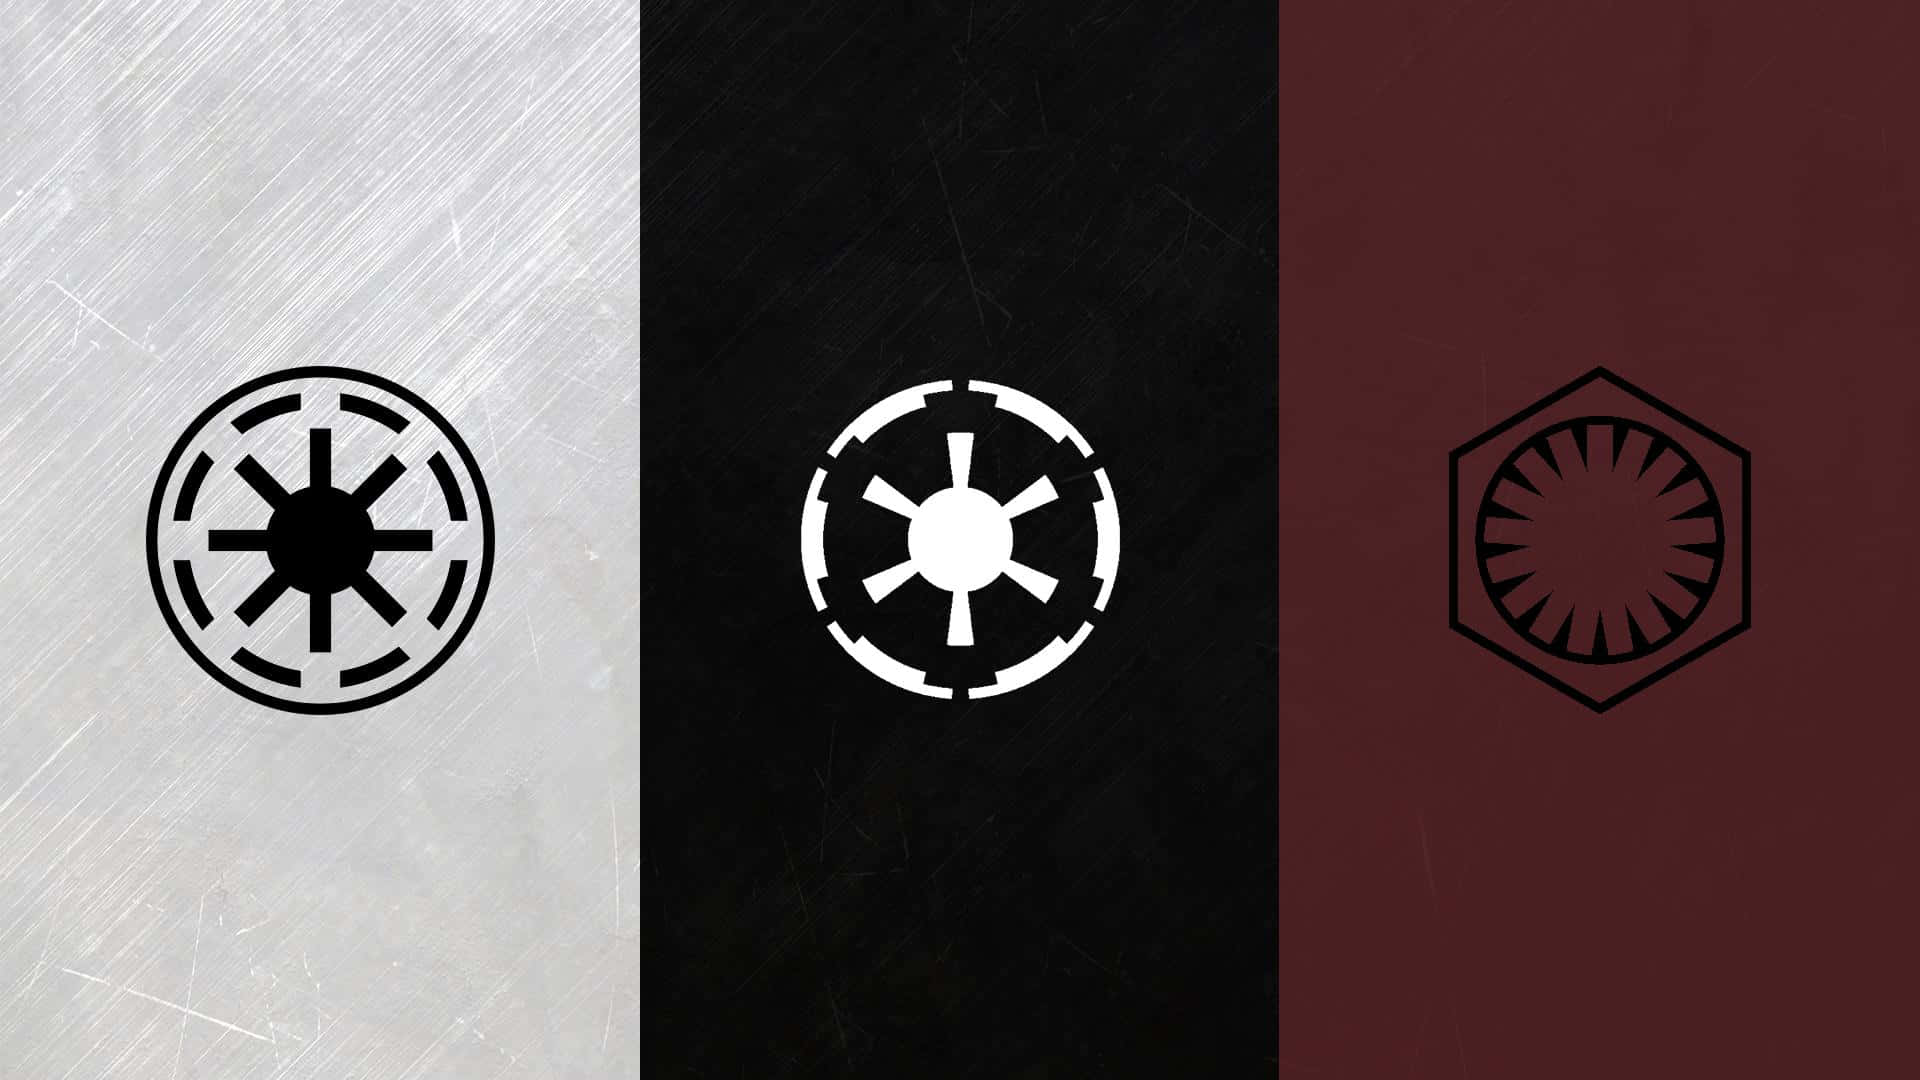 Star Wars Logos In Different Colors Wallpaper